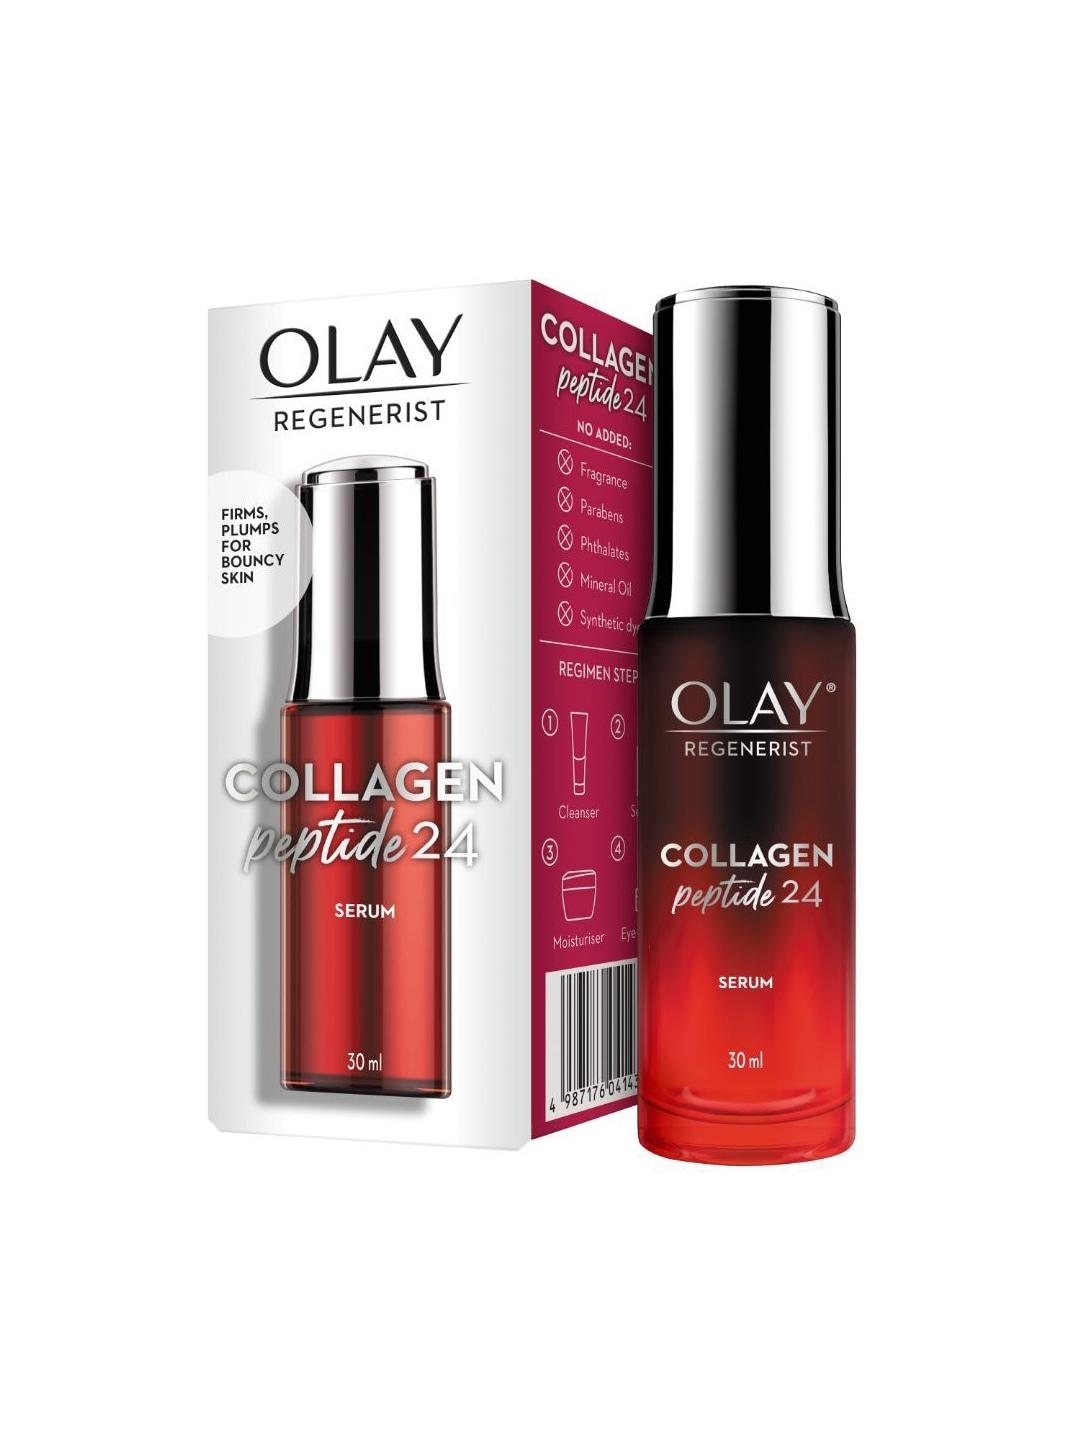 Olay Regenerist Collagen Peptide 24 Face Serum with Niacinamide 30 ml